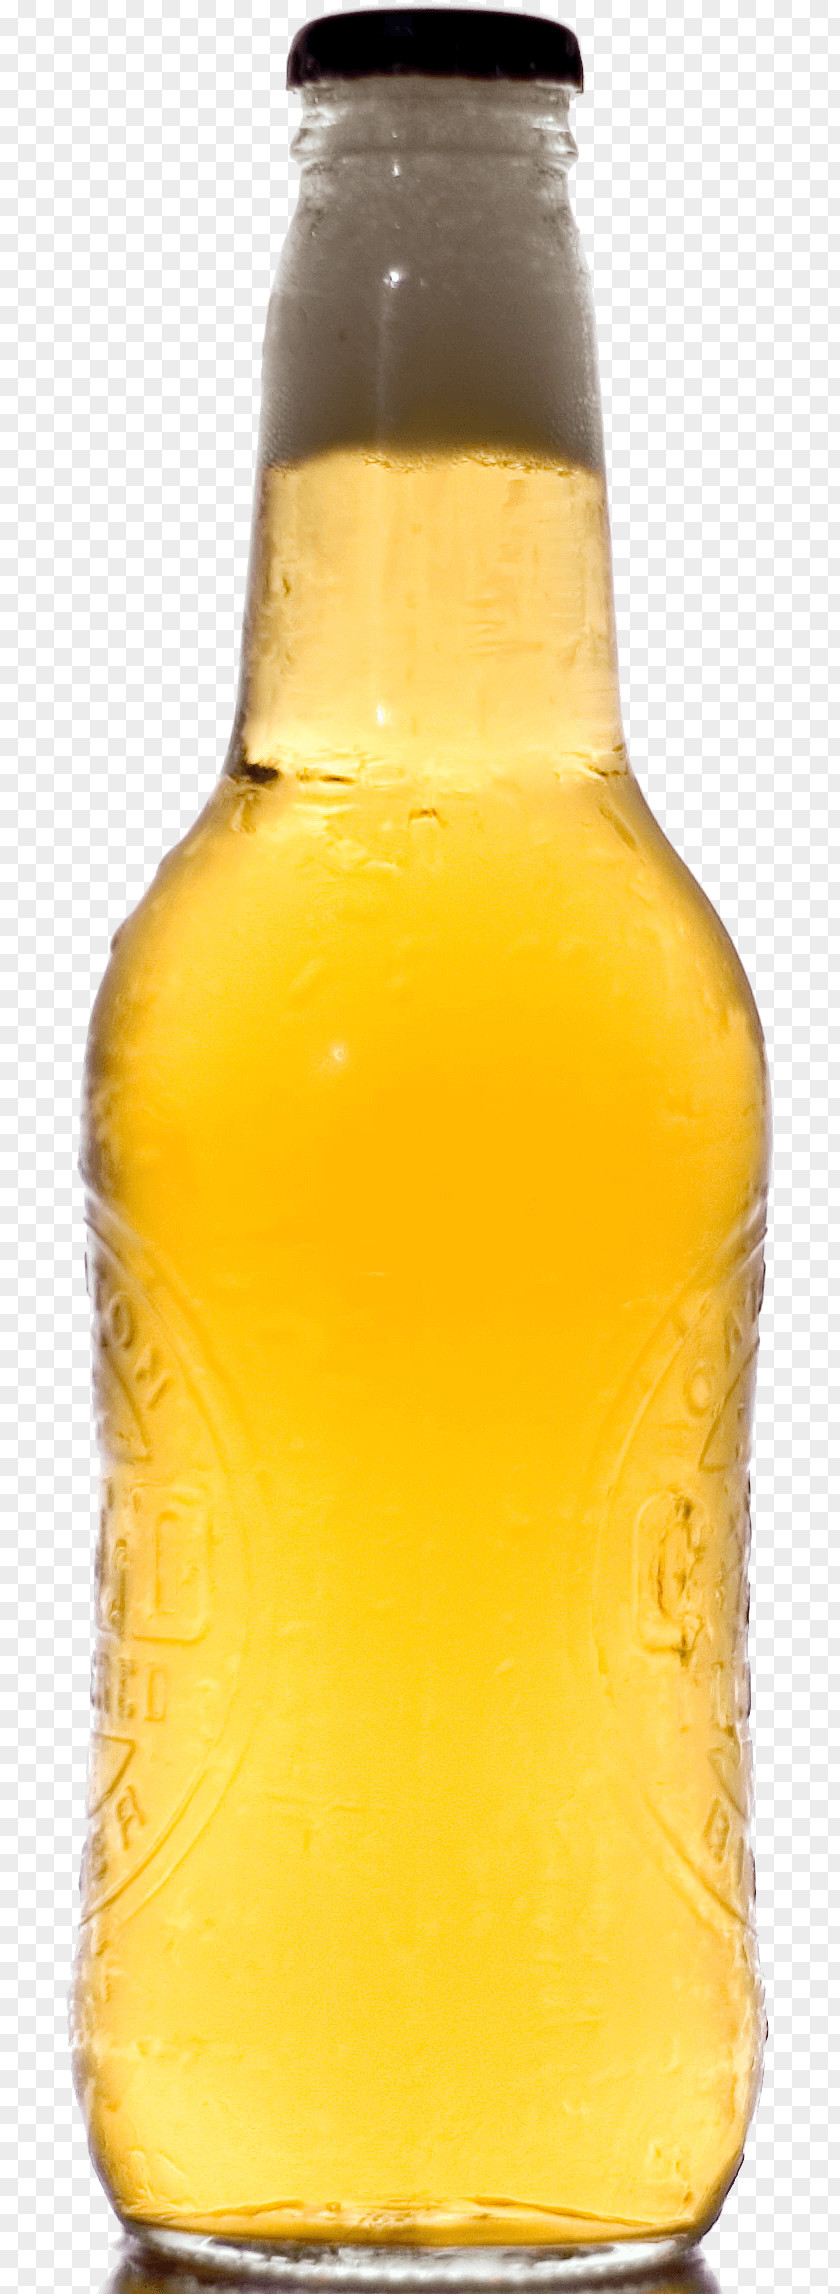 Beer Party Bottle Asahi Breweries Corona Ale PNG